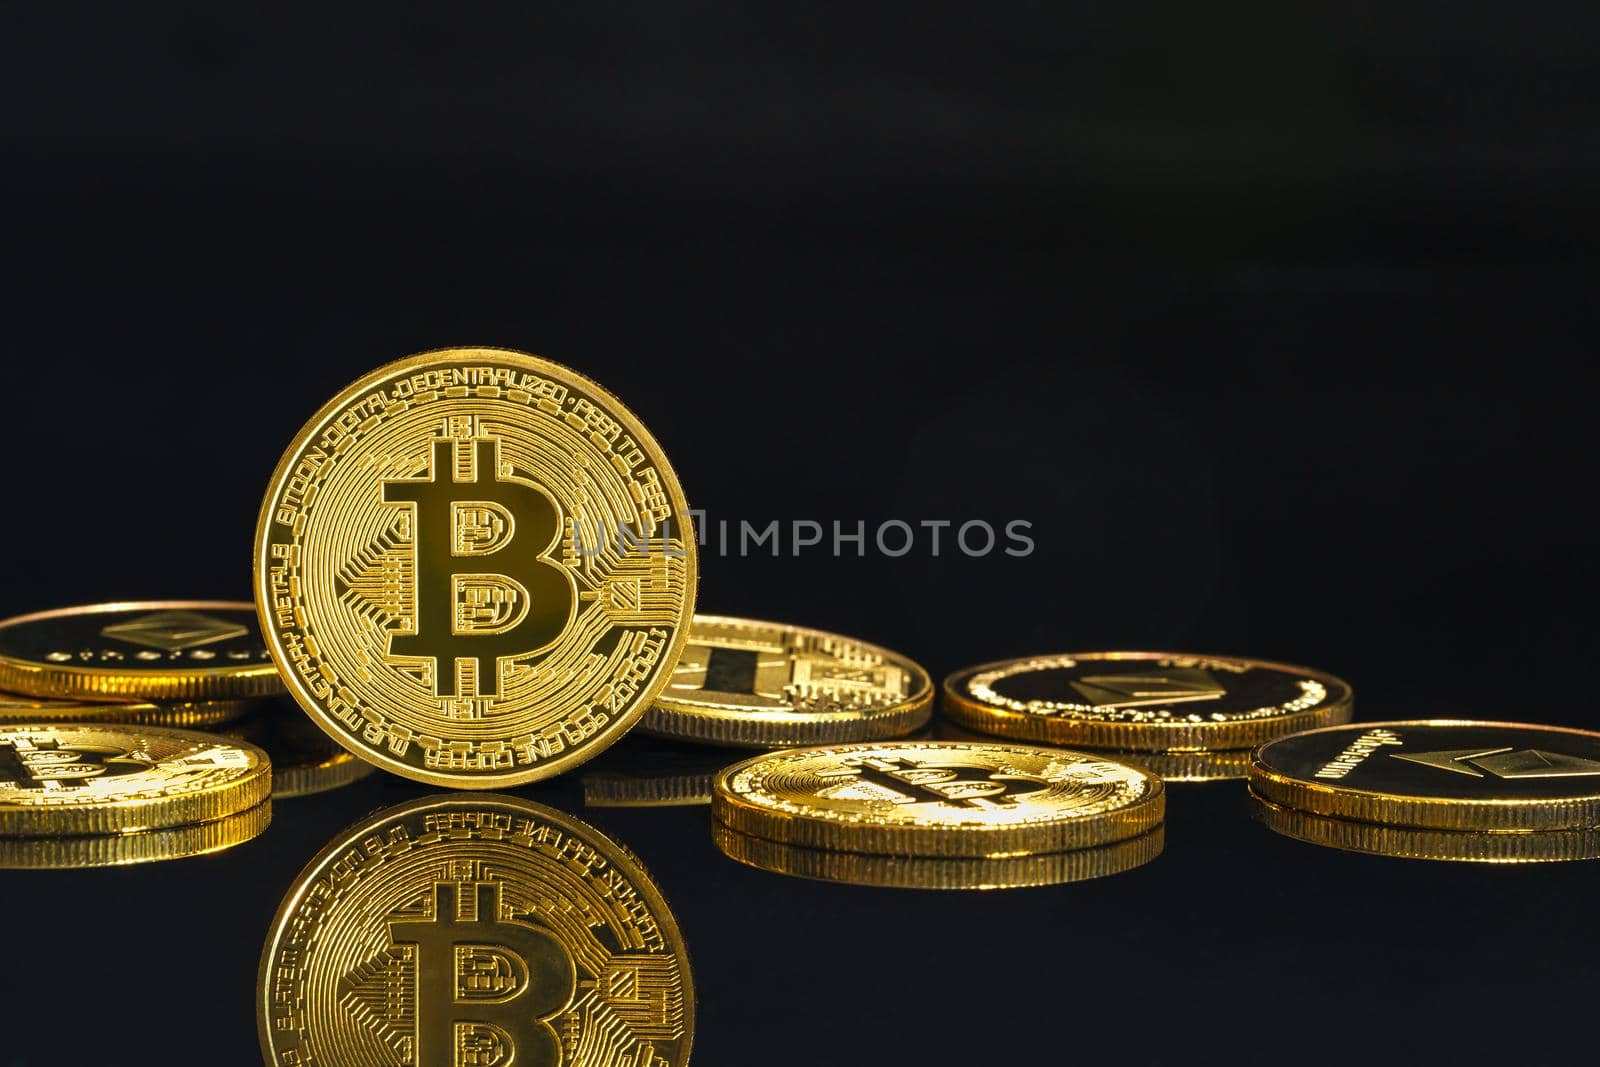 Bitcoin cryptocurrency digital bit coin BTC currency concept ,Golden coins with bitcoin and litecions symbol on a black background